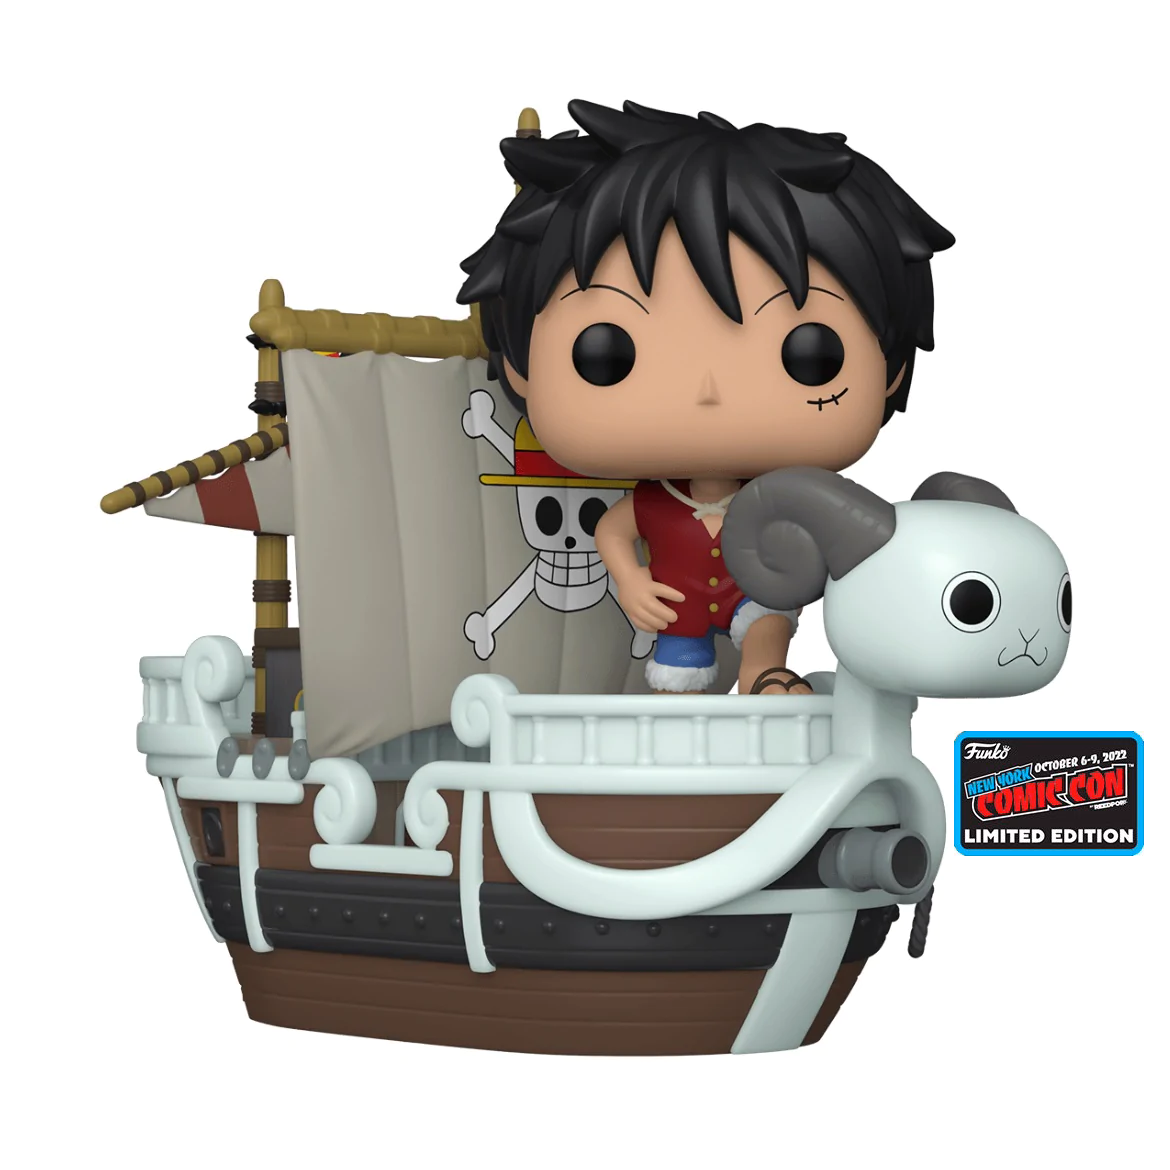 POP! Rides Super Deluxe: One Piece - Luffy with the Going Merry! (New York Comic Con 2022 Sticker)